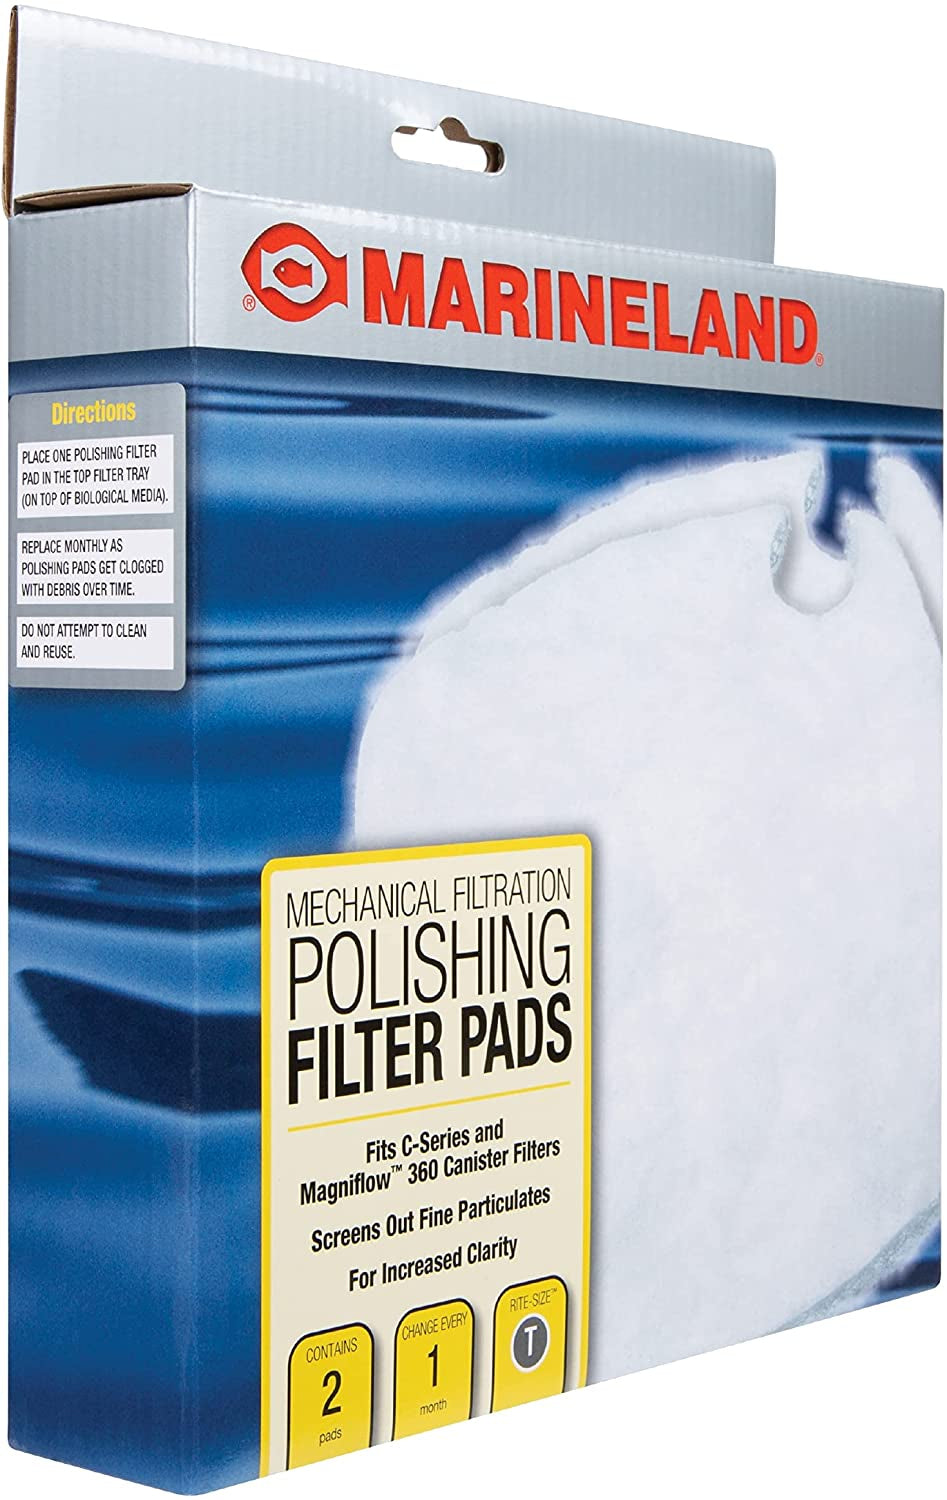 10 count (5 x 2 ct) Marineland Polishing Filter Pads for Canister Filters Rite-Size T